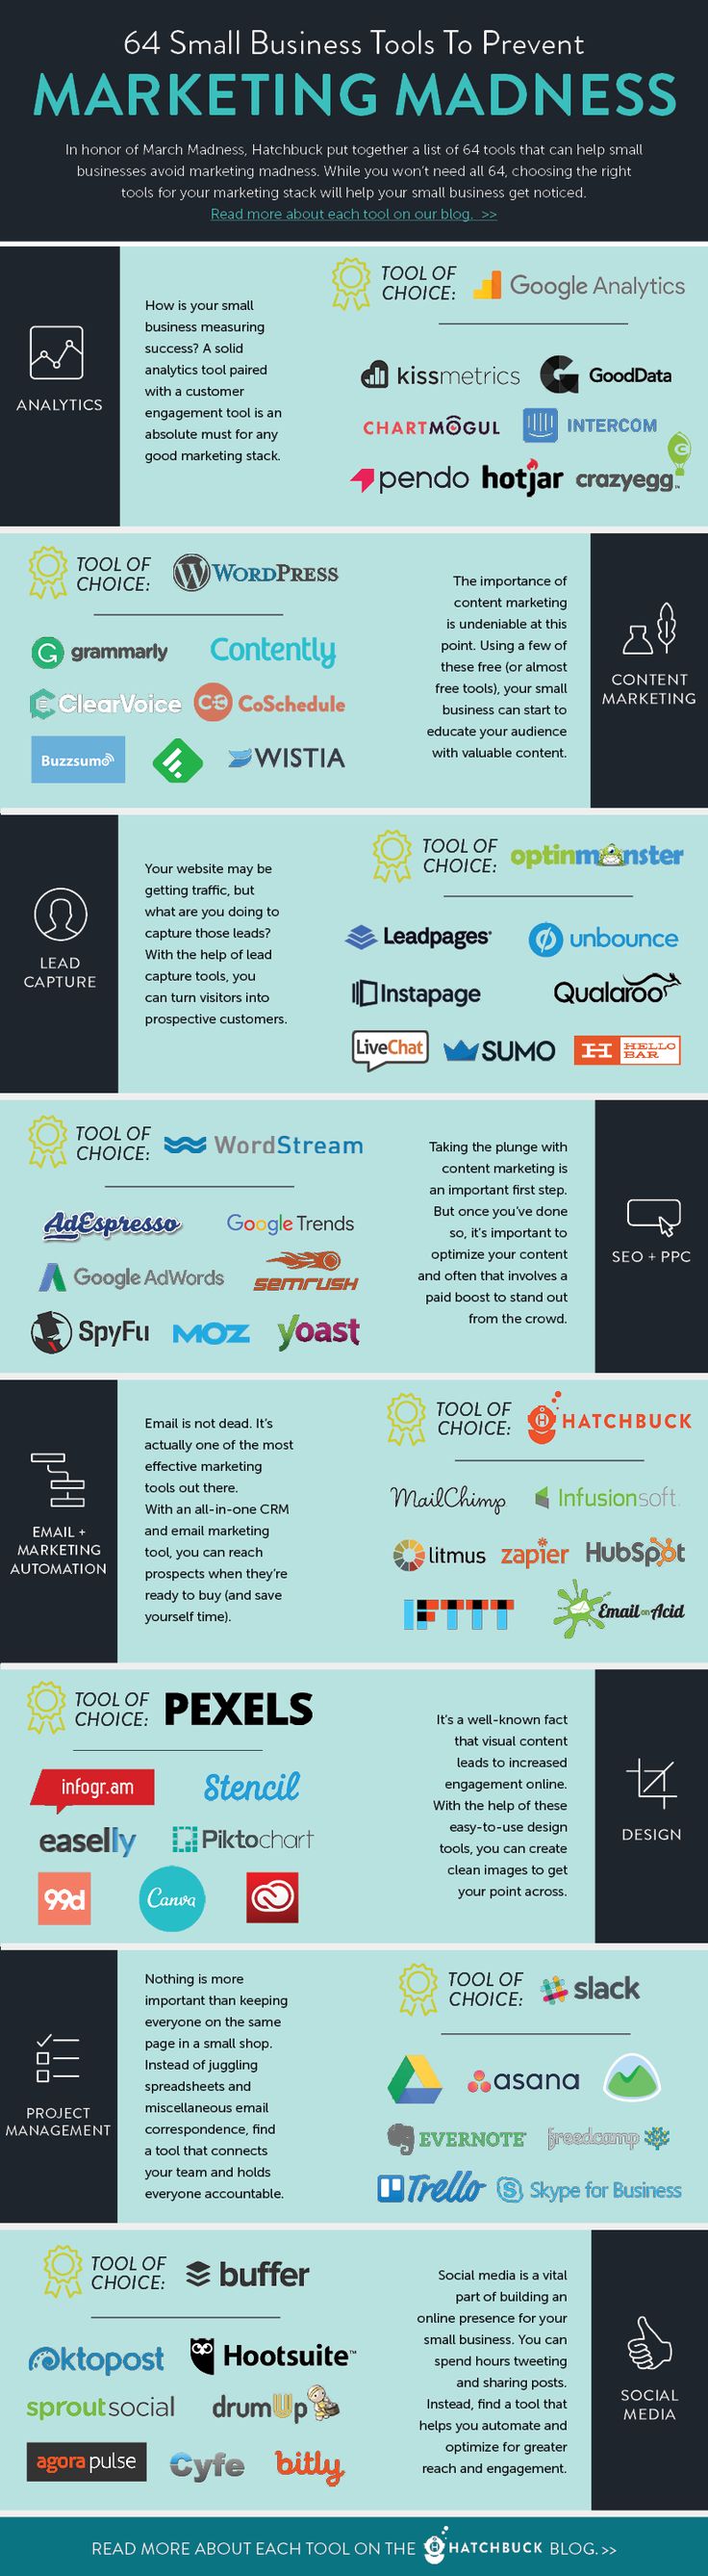 Advertising-Infographics-64-SMALL-BUSINESS-TOOLS-TO-PREVENT-MARKETING Advertising Infographics : 64 SMALL BUSINESS TOOLS TO PREVENT MARKETING MADNESS